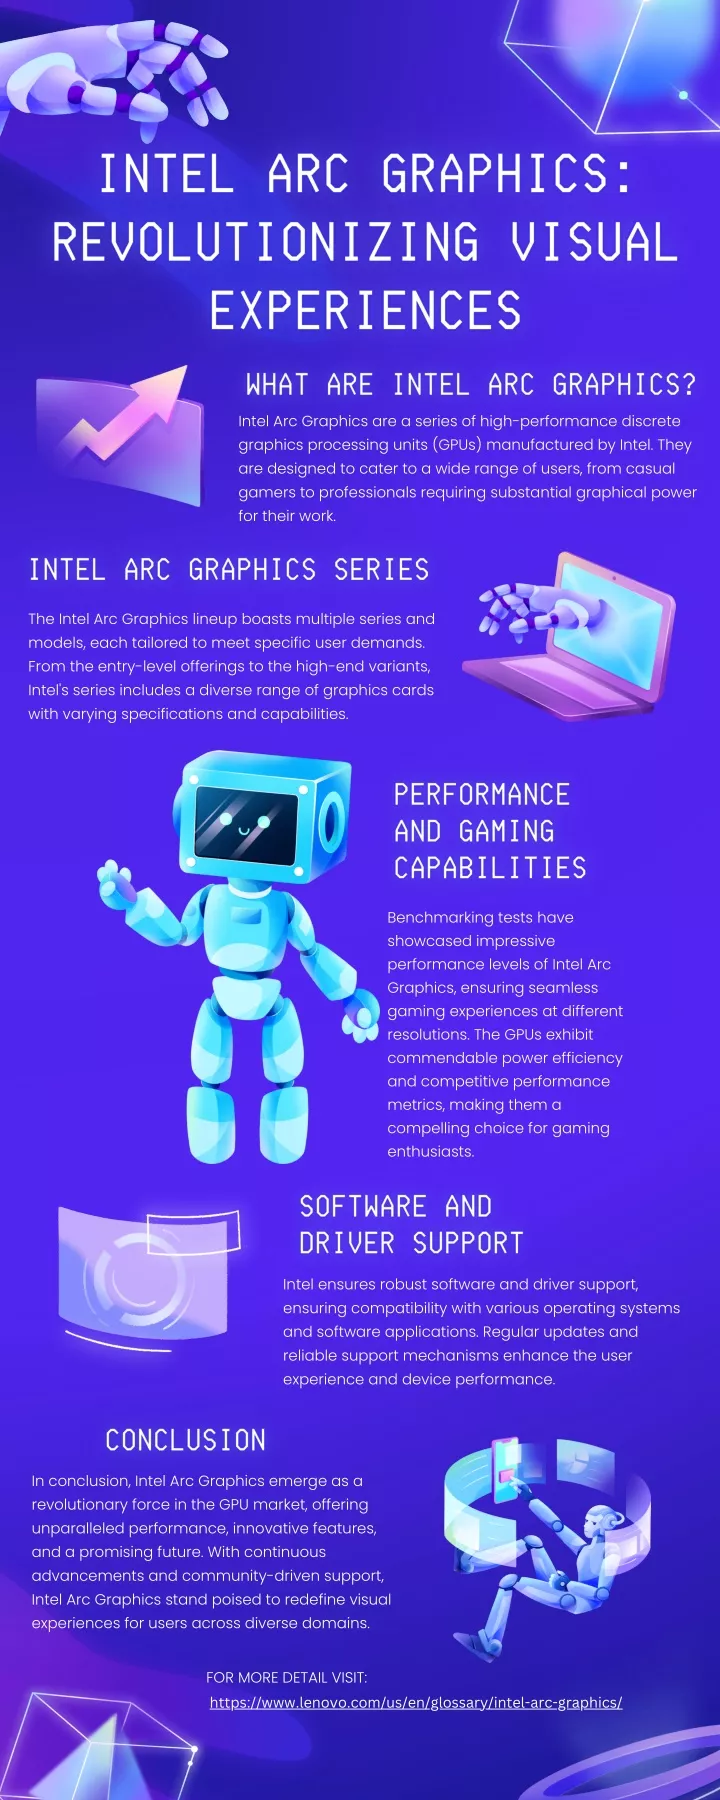 intel arc graphics are a series of high